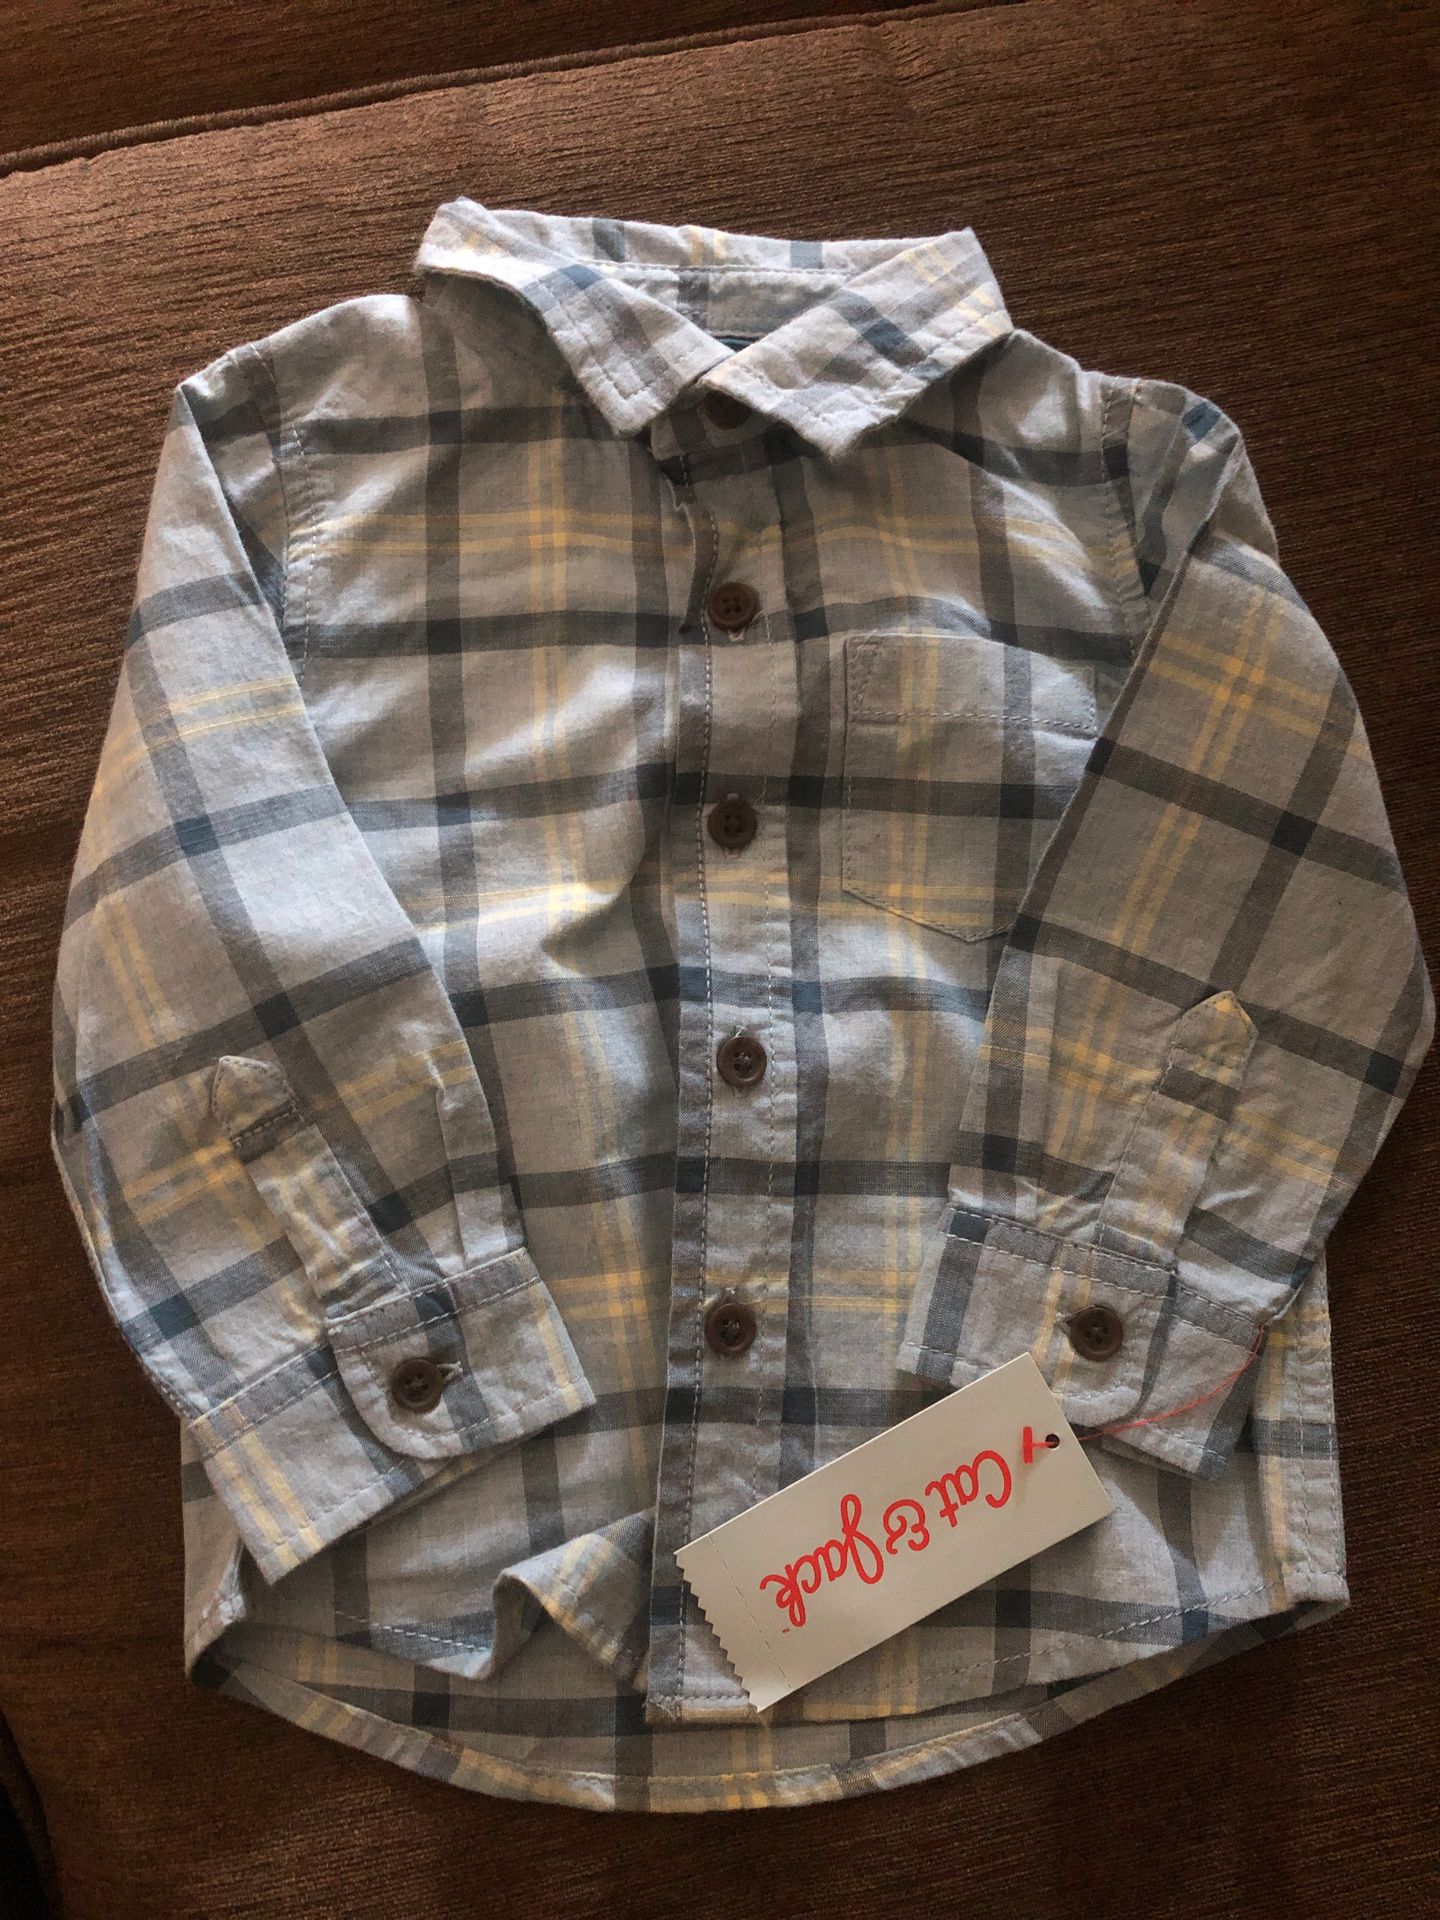 Boys 12m shirt NEW with tags.